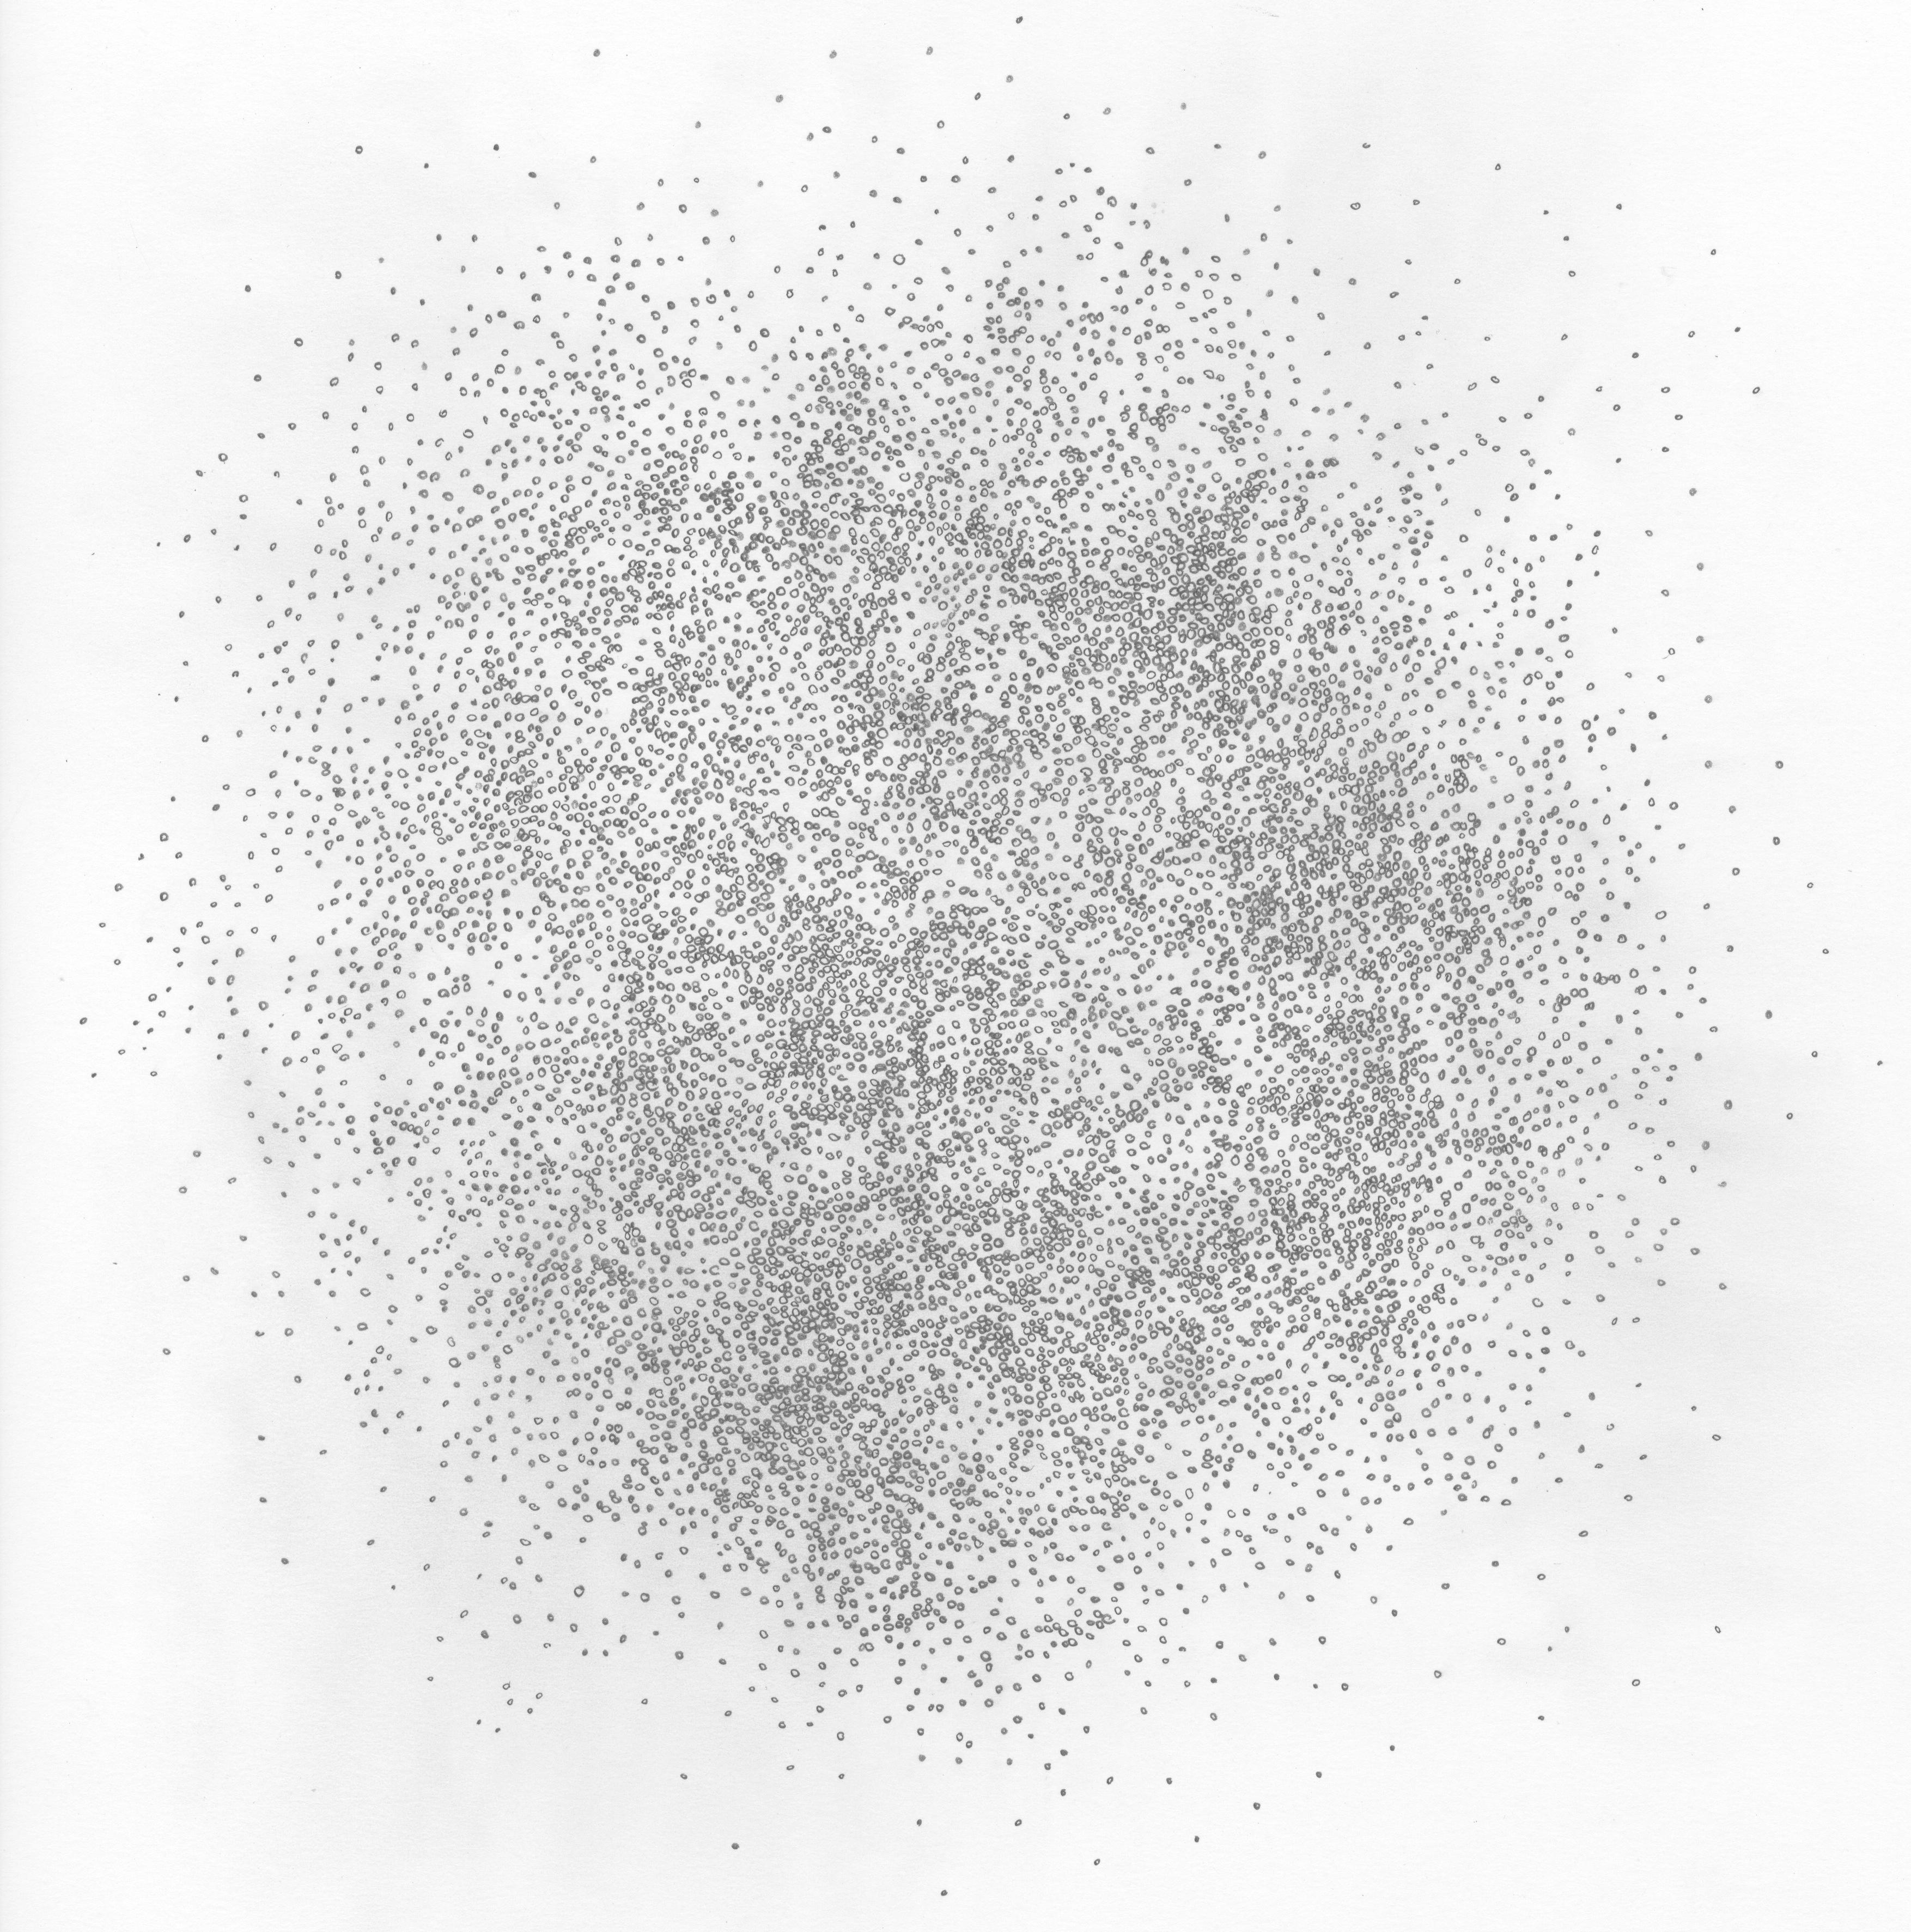 Drawing #146s from a portfolio of 33 Drawings, 2016-18, Graphite on paper (unframed), 13 4/5 × 13 4/5 in; 35 × 35 cm by Alan Franklin

This original drawing on paper is from a portfolio of 33 drawings by the sculptor and artist, Alan Franklin. Alan